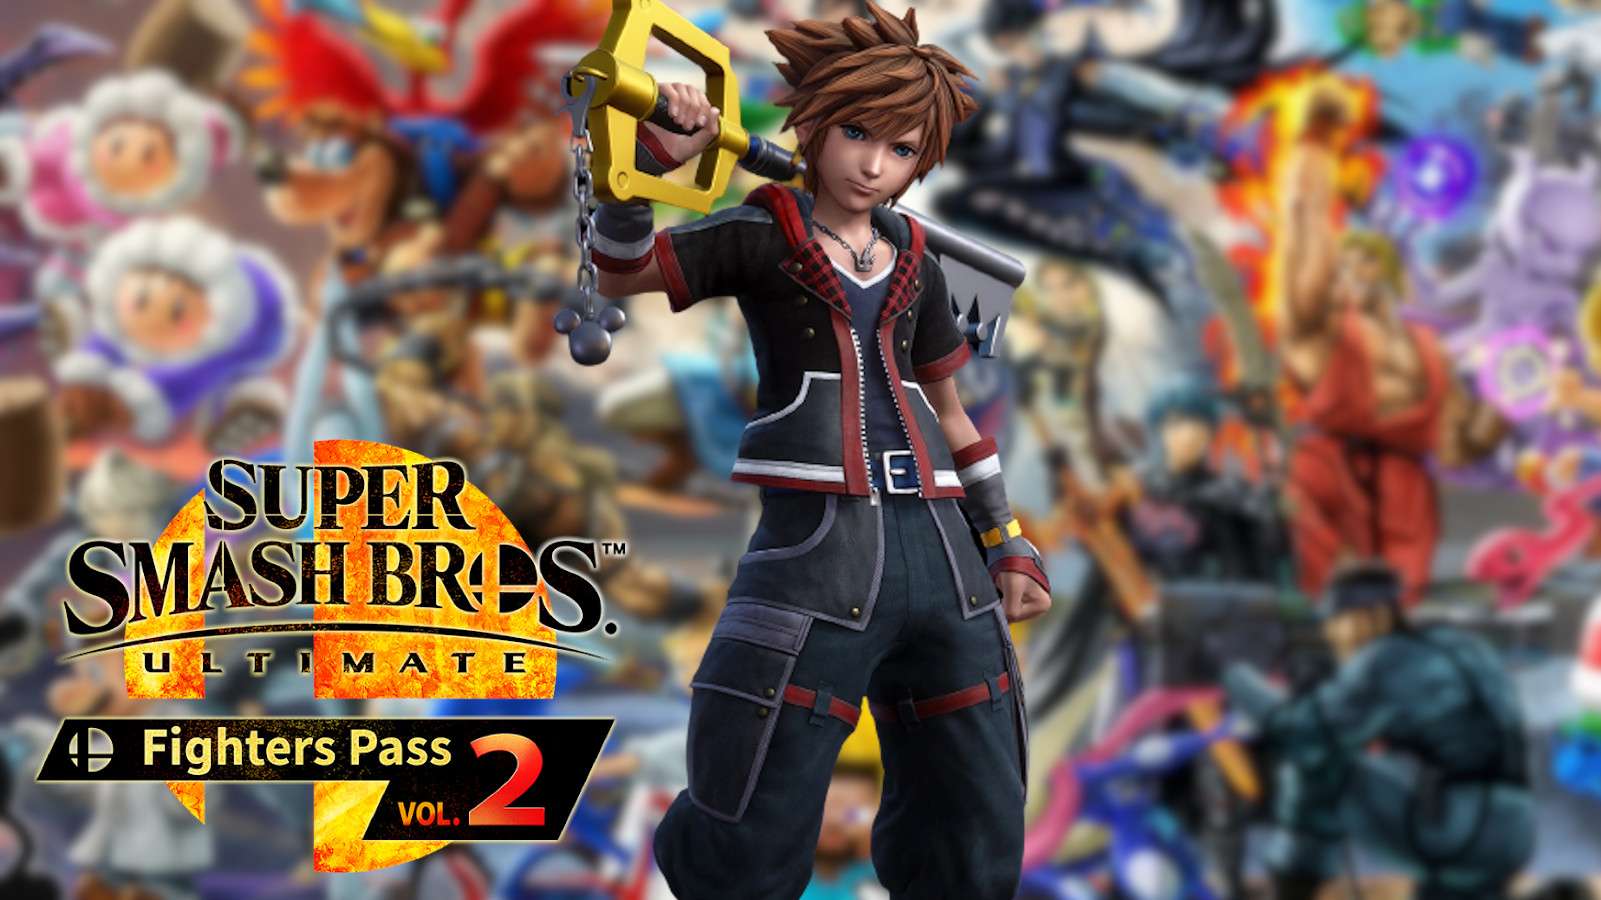 Sora from Kingdom Hearts in Smash Ultimate Fighters Pass Volume 2